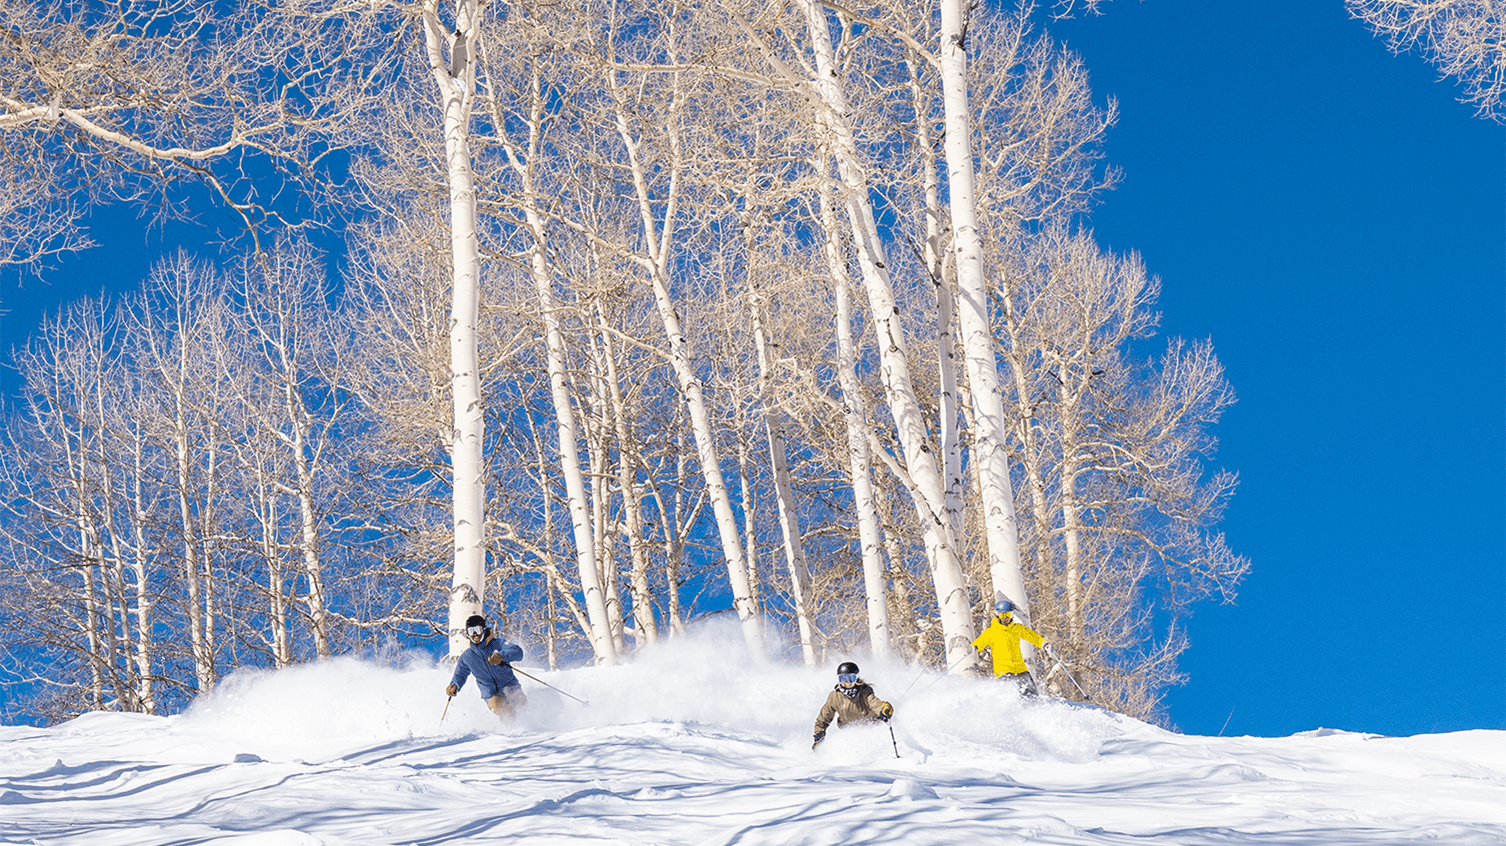 Three skiers in deep powder, in front of a aspen grove, with a deep bluebird sky in the background